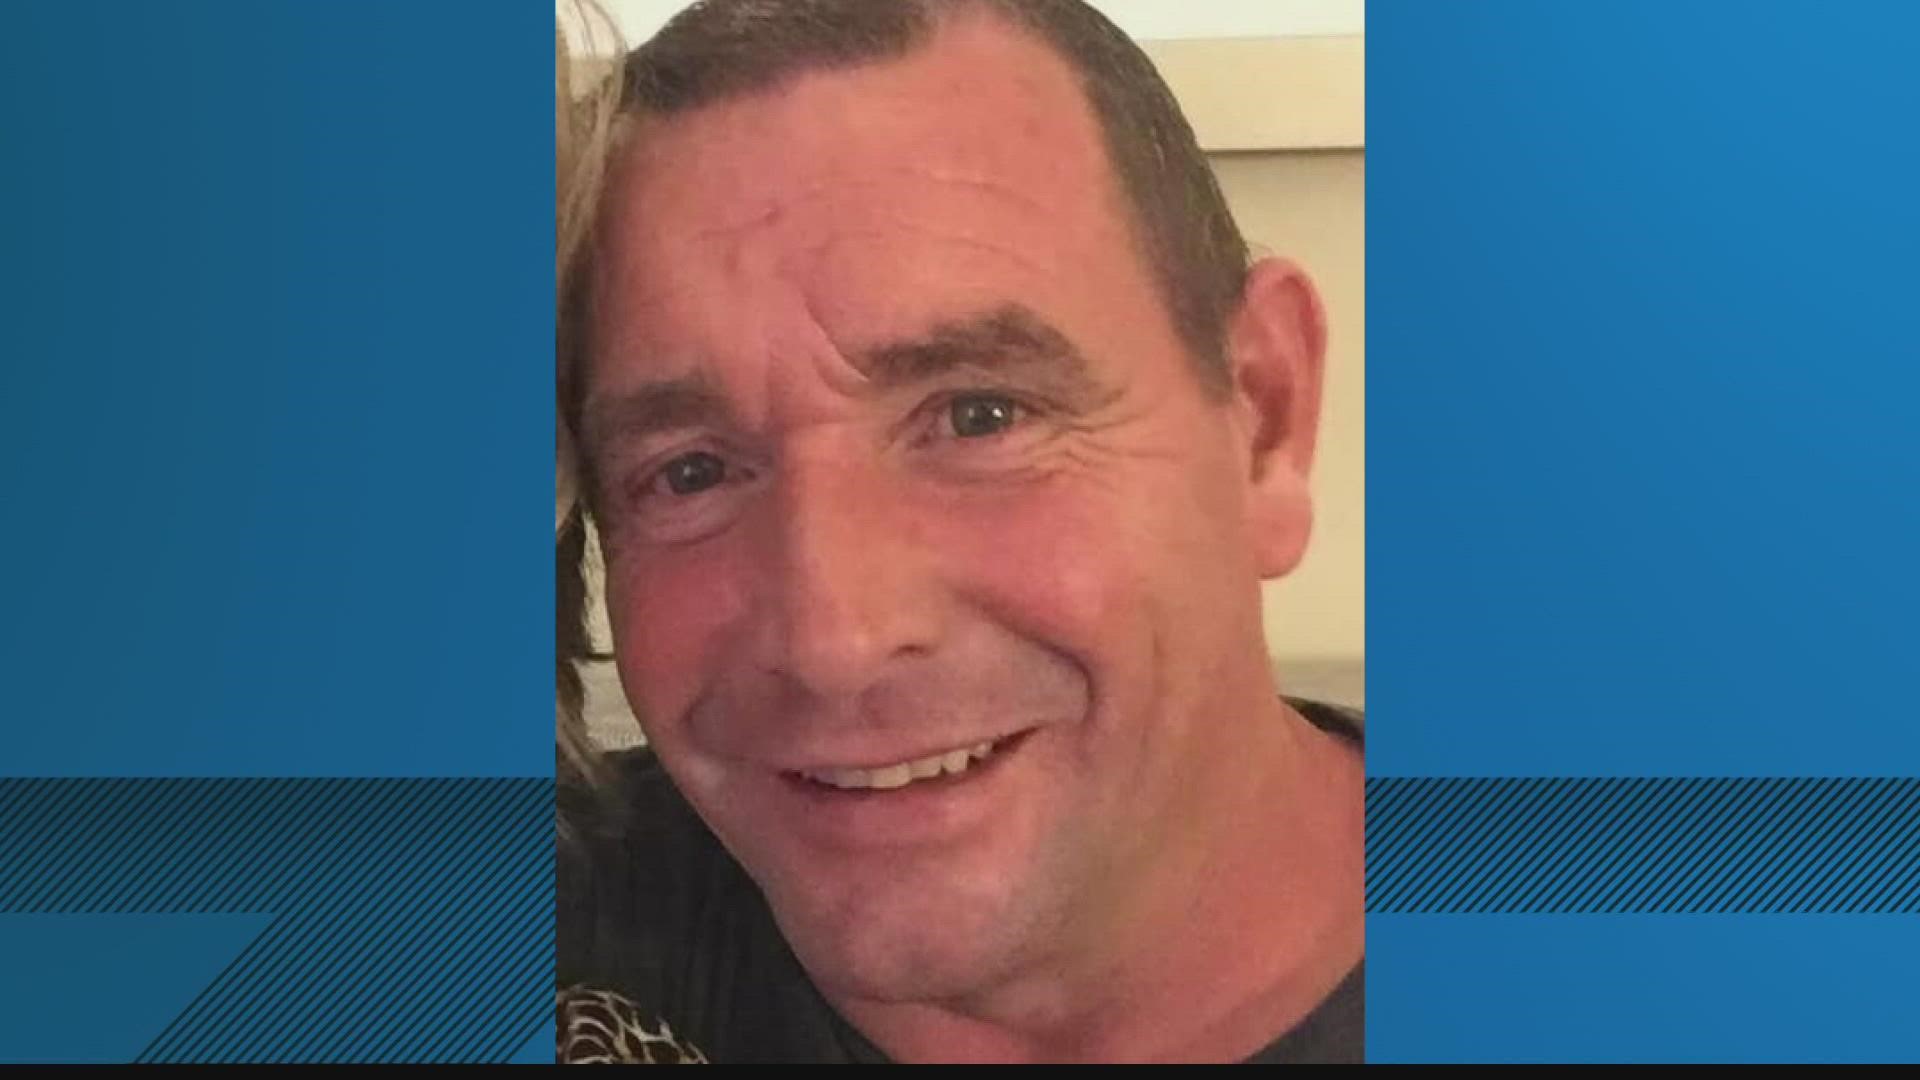 The family of John McNamee, who moved to Jacksonville 13 years ago from Ireland, says they're searching for any information about his whereabouts.